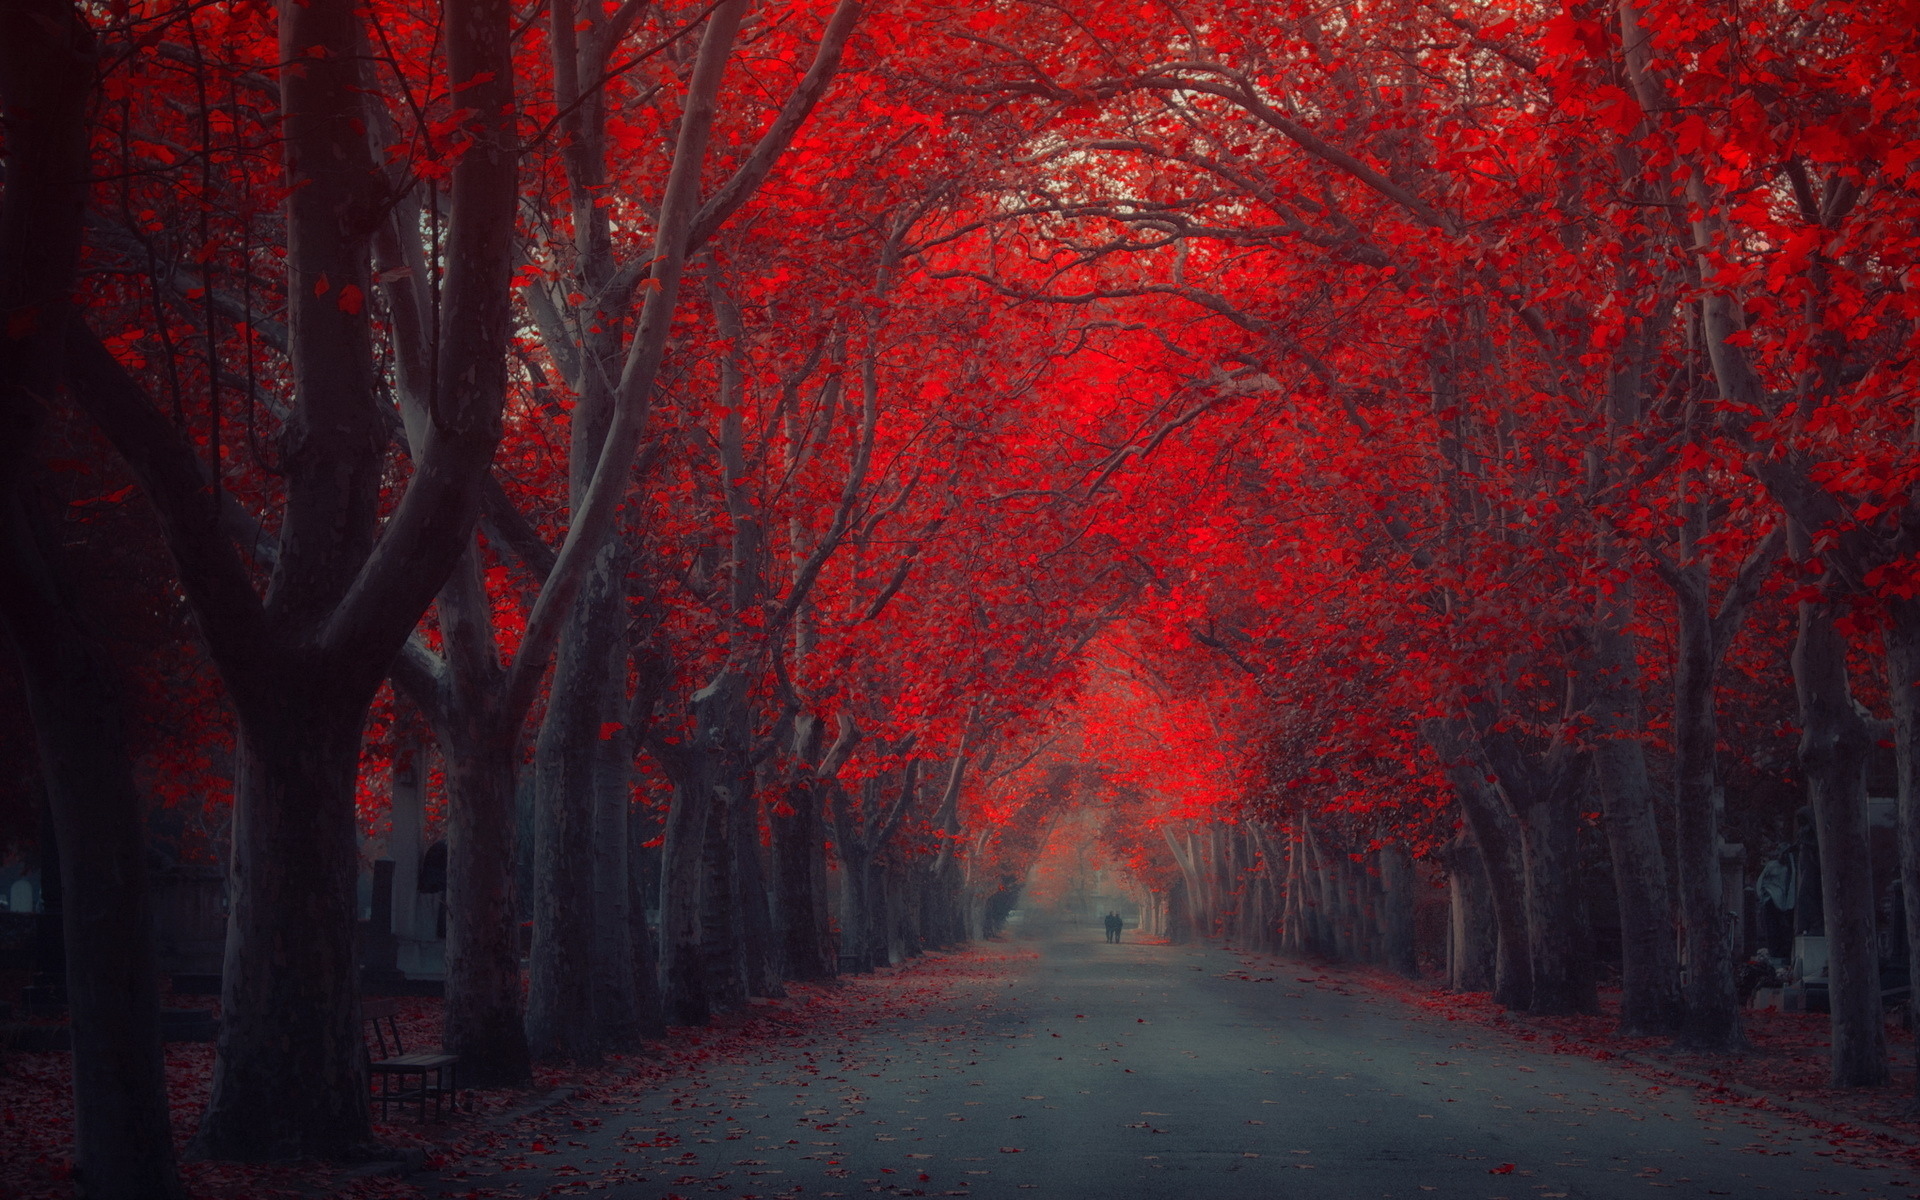 nature, Landscapes, Roads, Path, Trees, Park, Forests, Leaves, Autumn, Fall, Seasons, People, Couple, Love, Romance, Mood, Emotion, Art, Artistic, Painting, Colors, Red Wallpaper